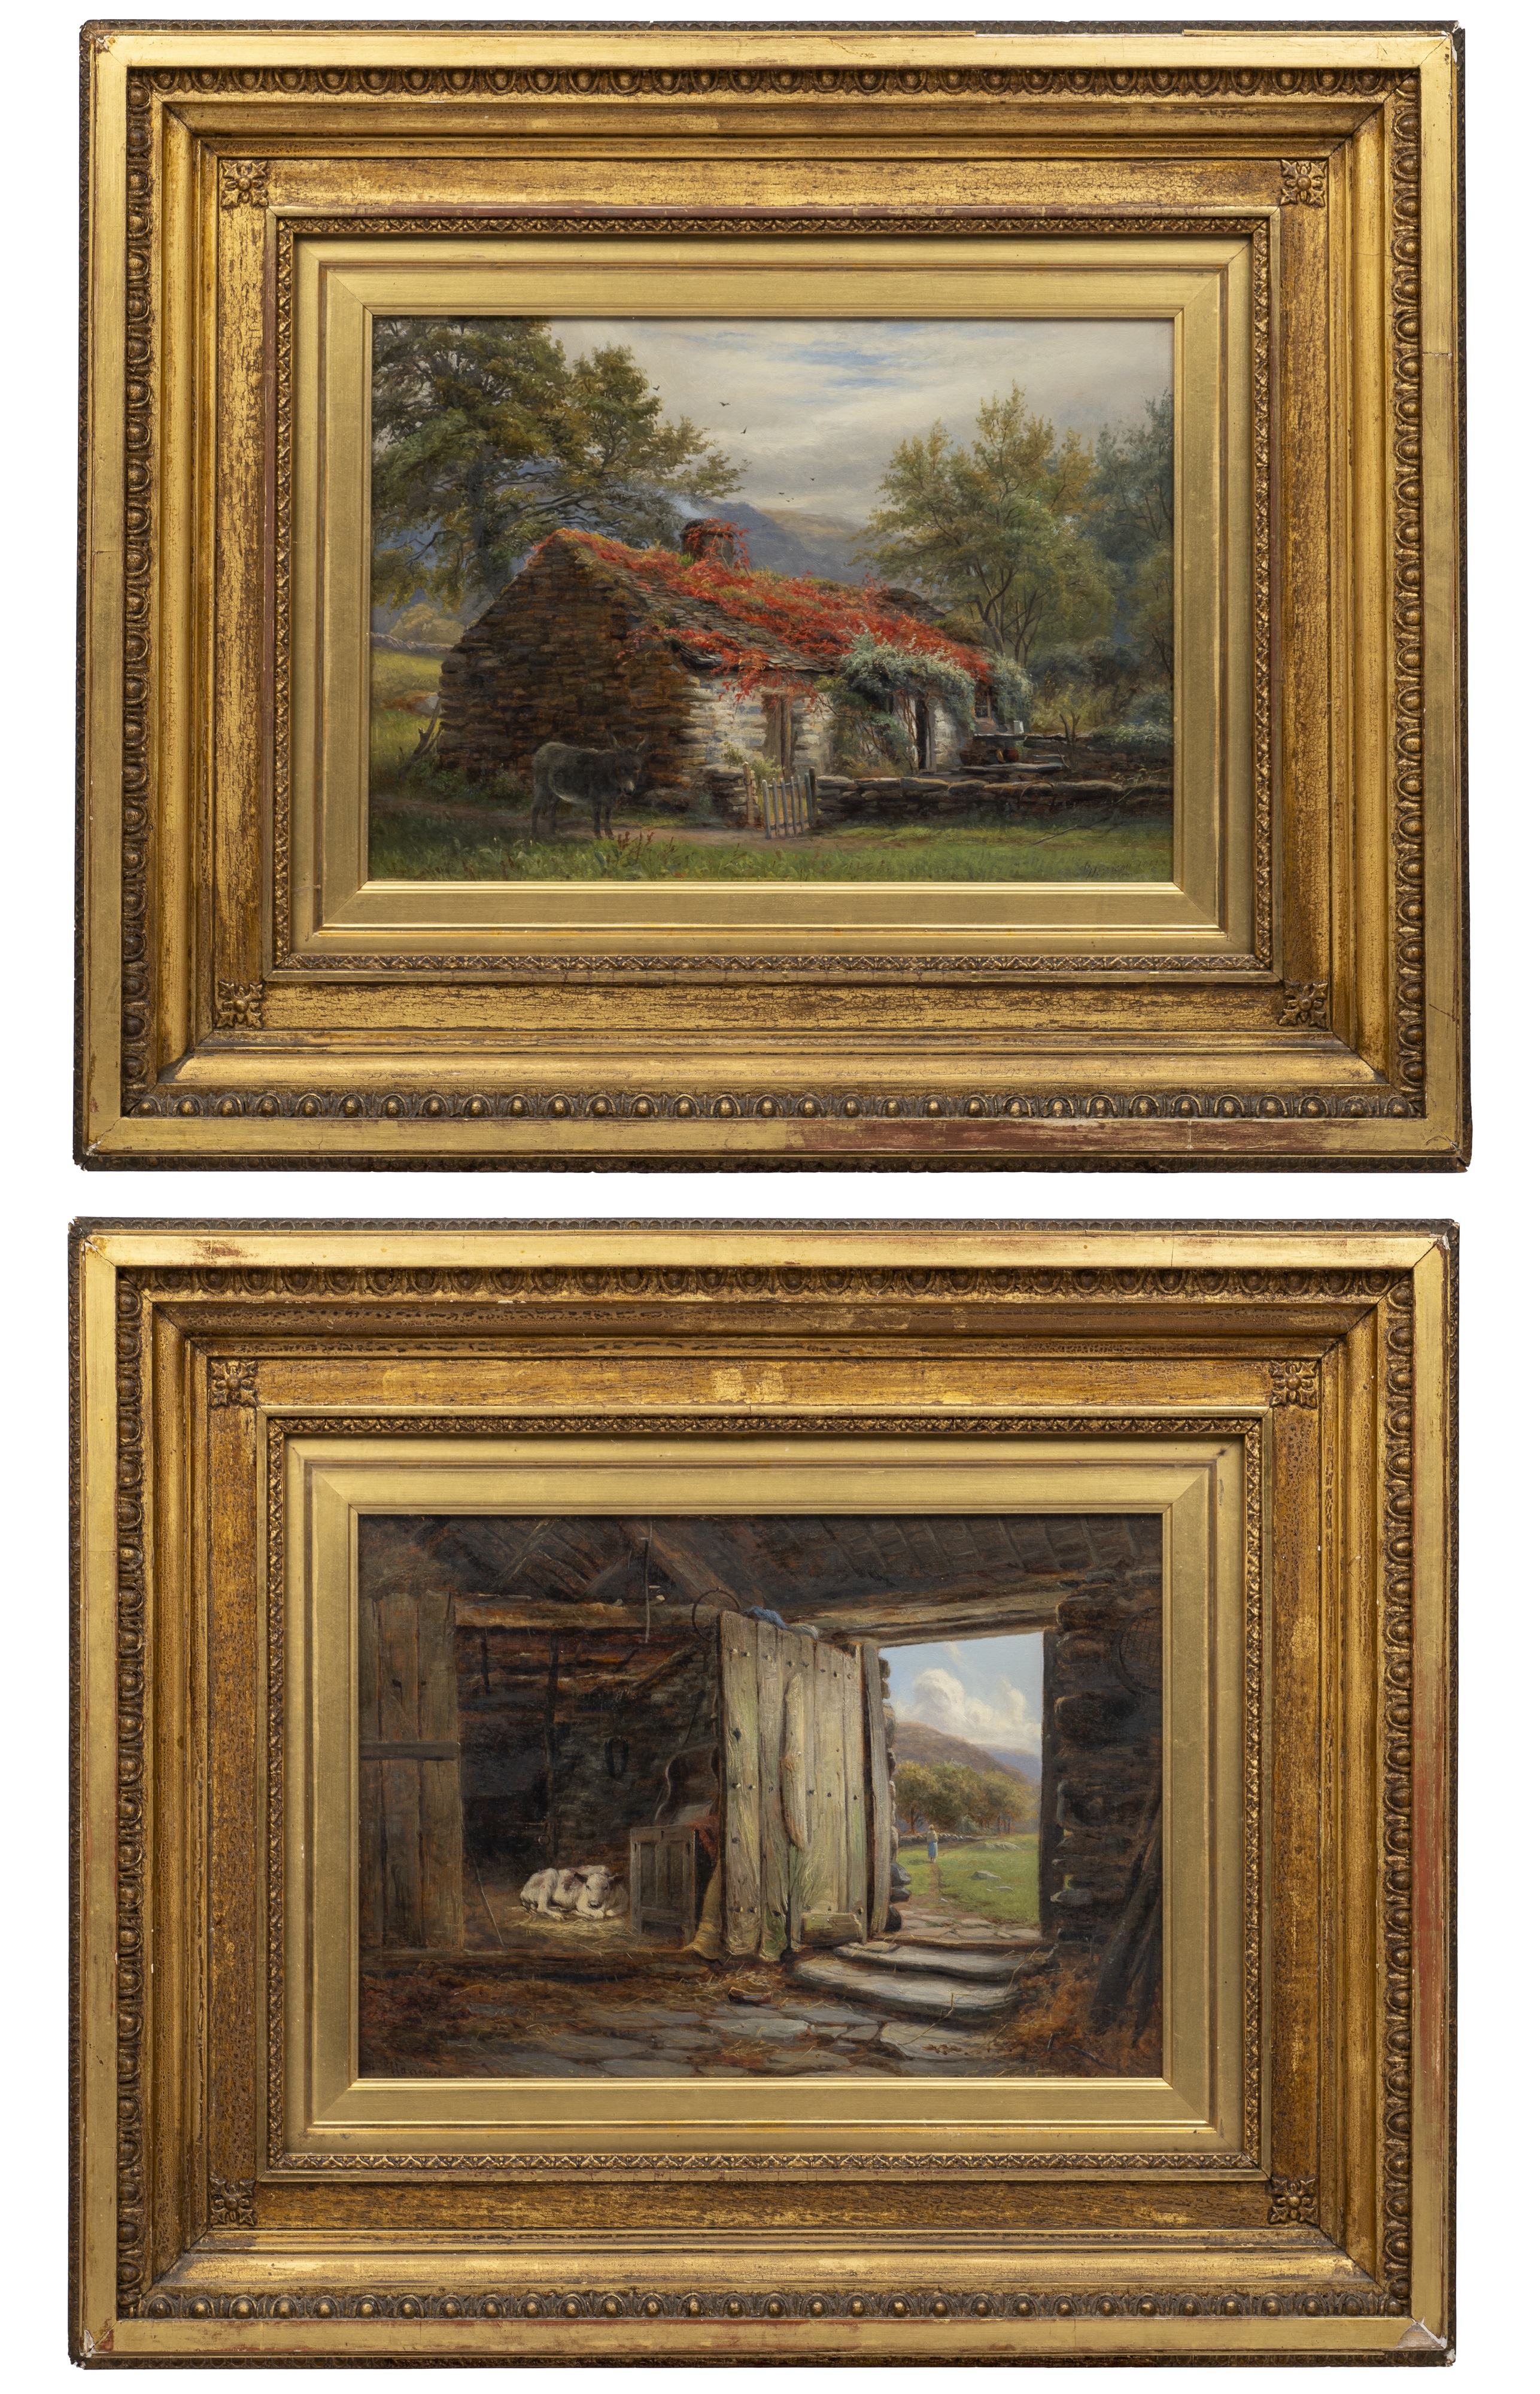 Two decorative paintings of rustic scenes